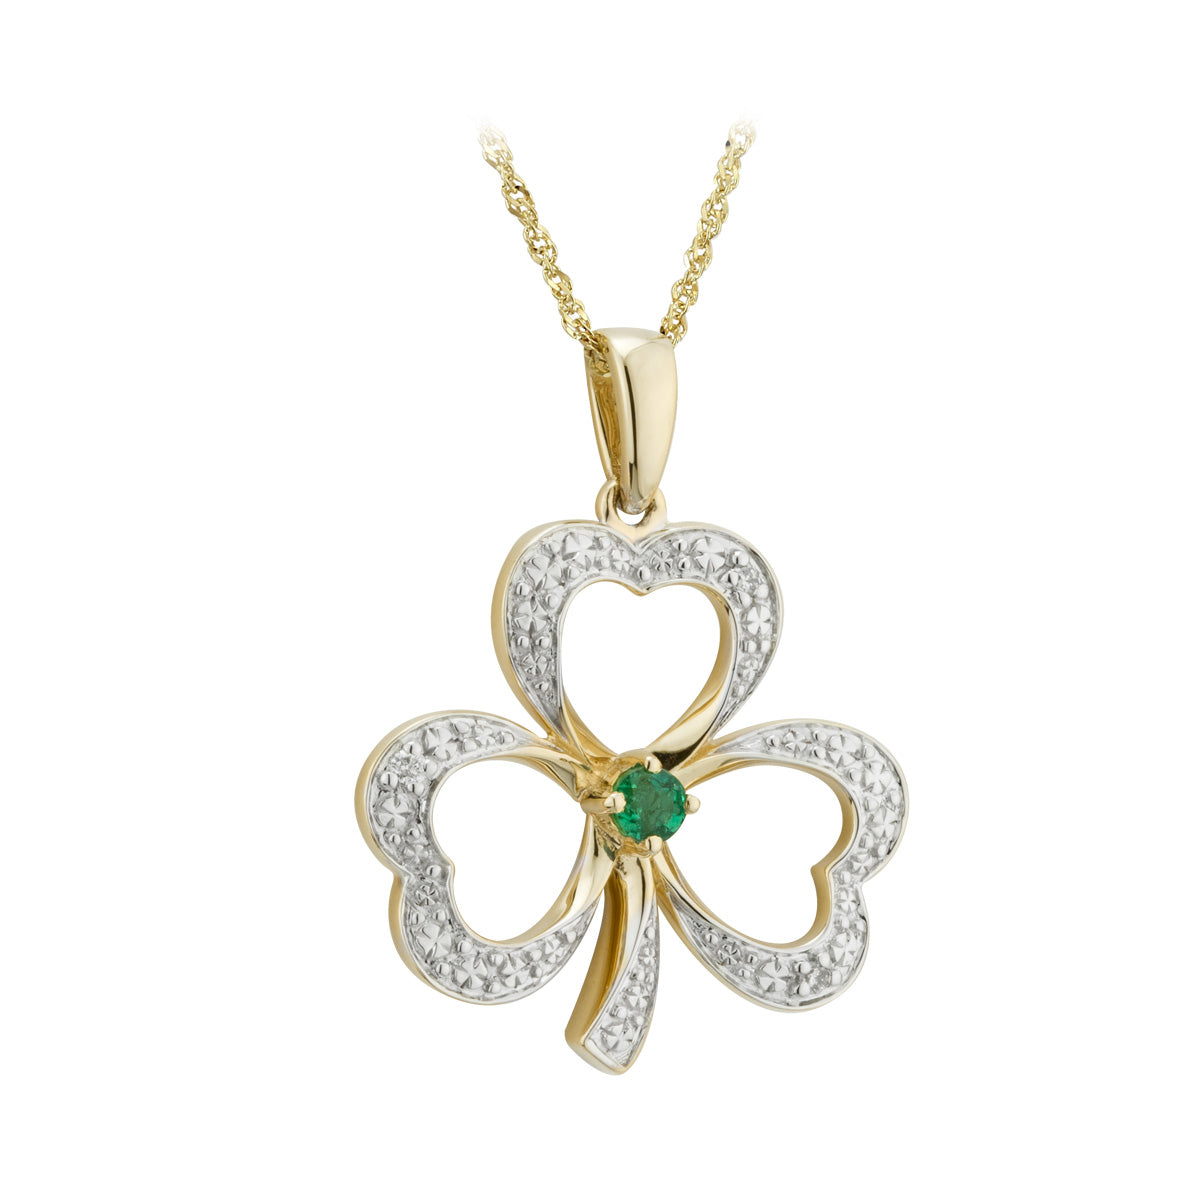 14k gold diamond and emerald shamrock necklace s46104 from Solvar